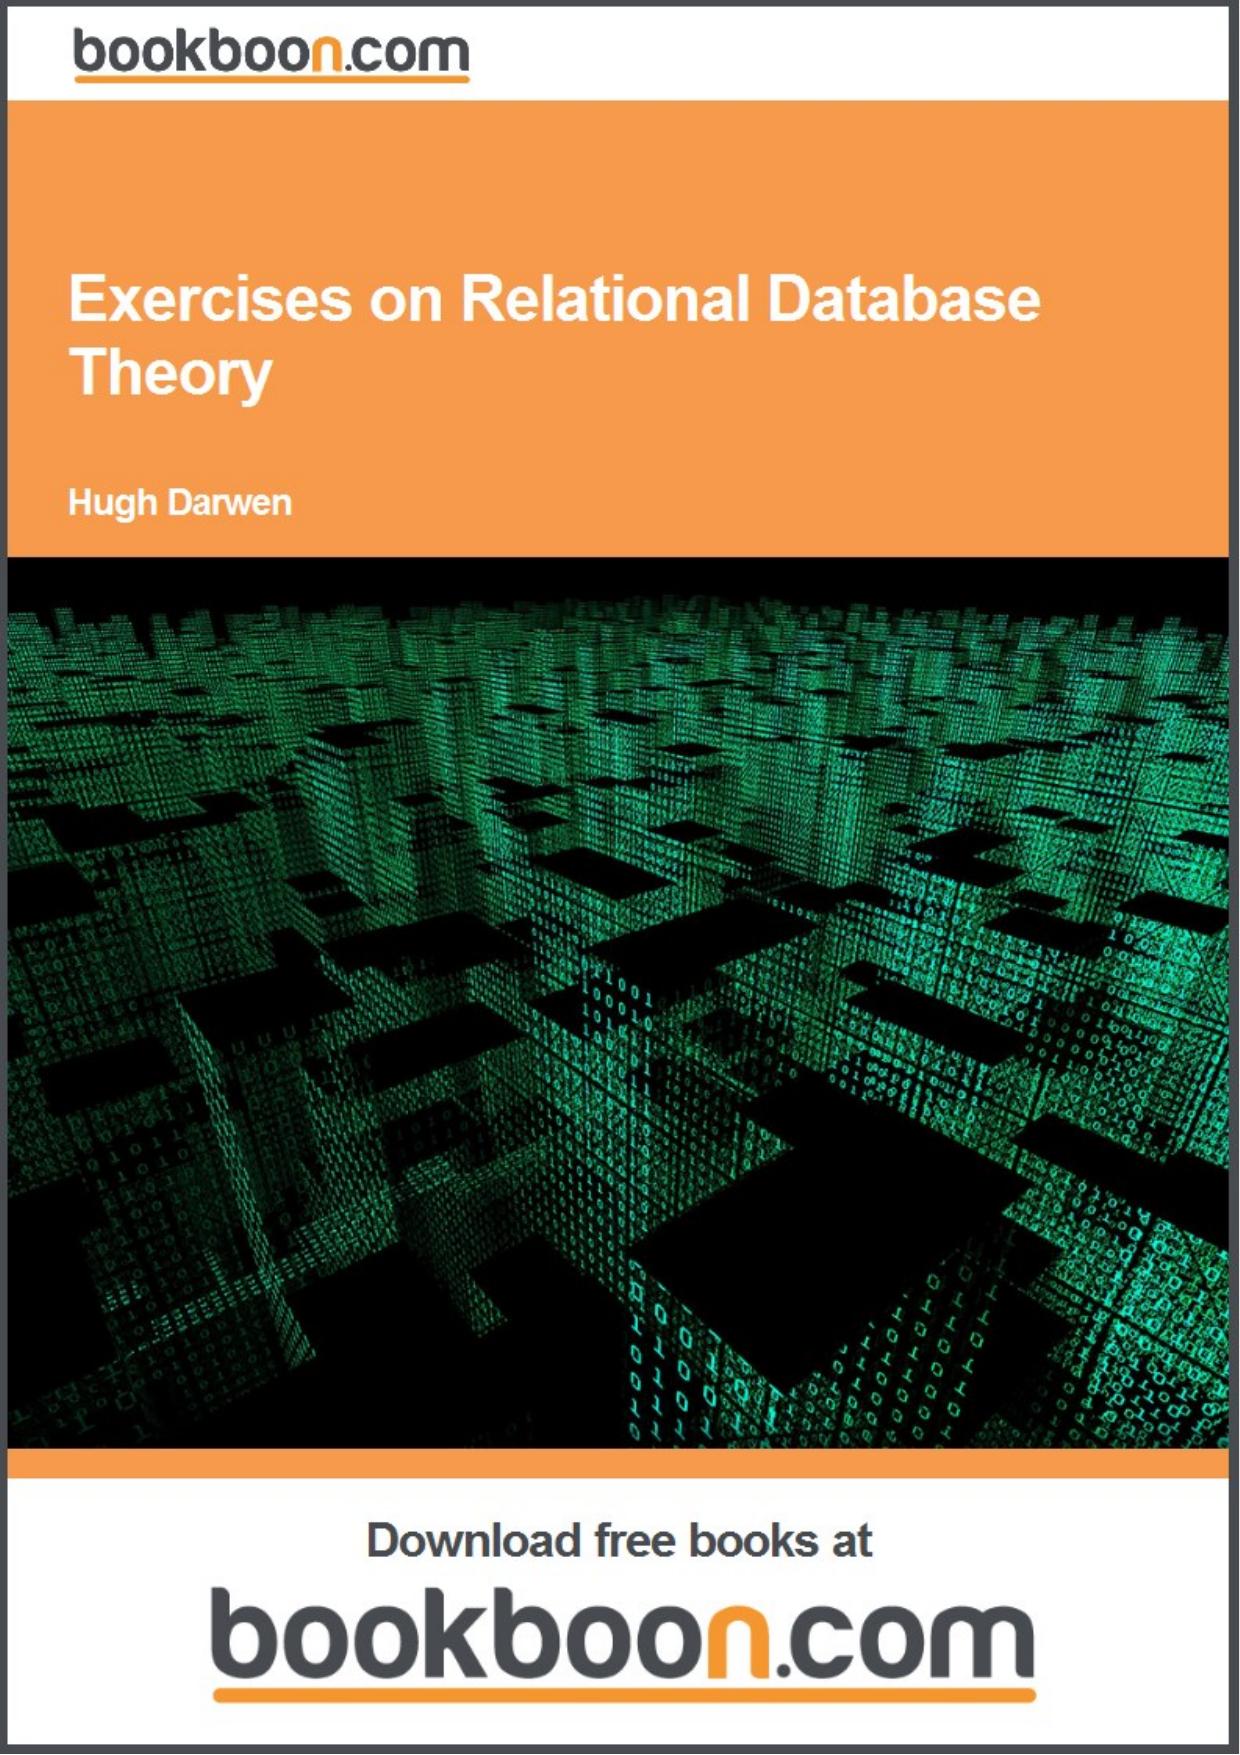 Exercises on Relational Database Theory by Bookboon.com